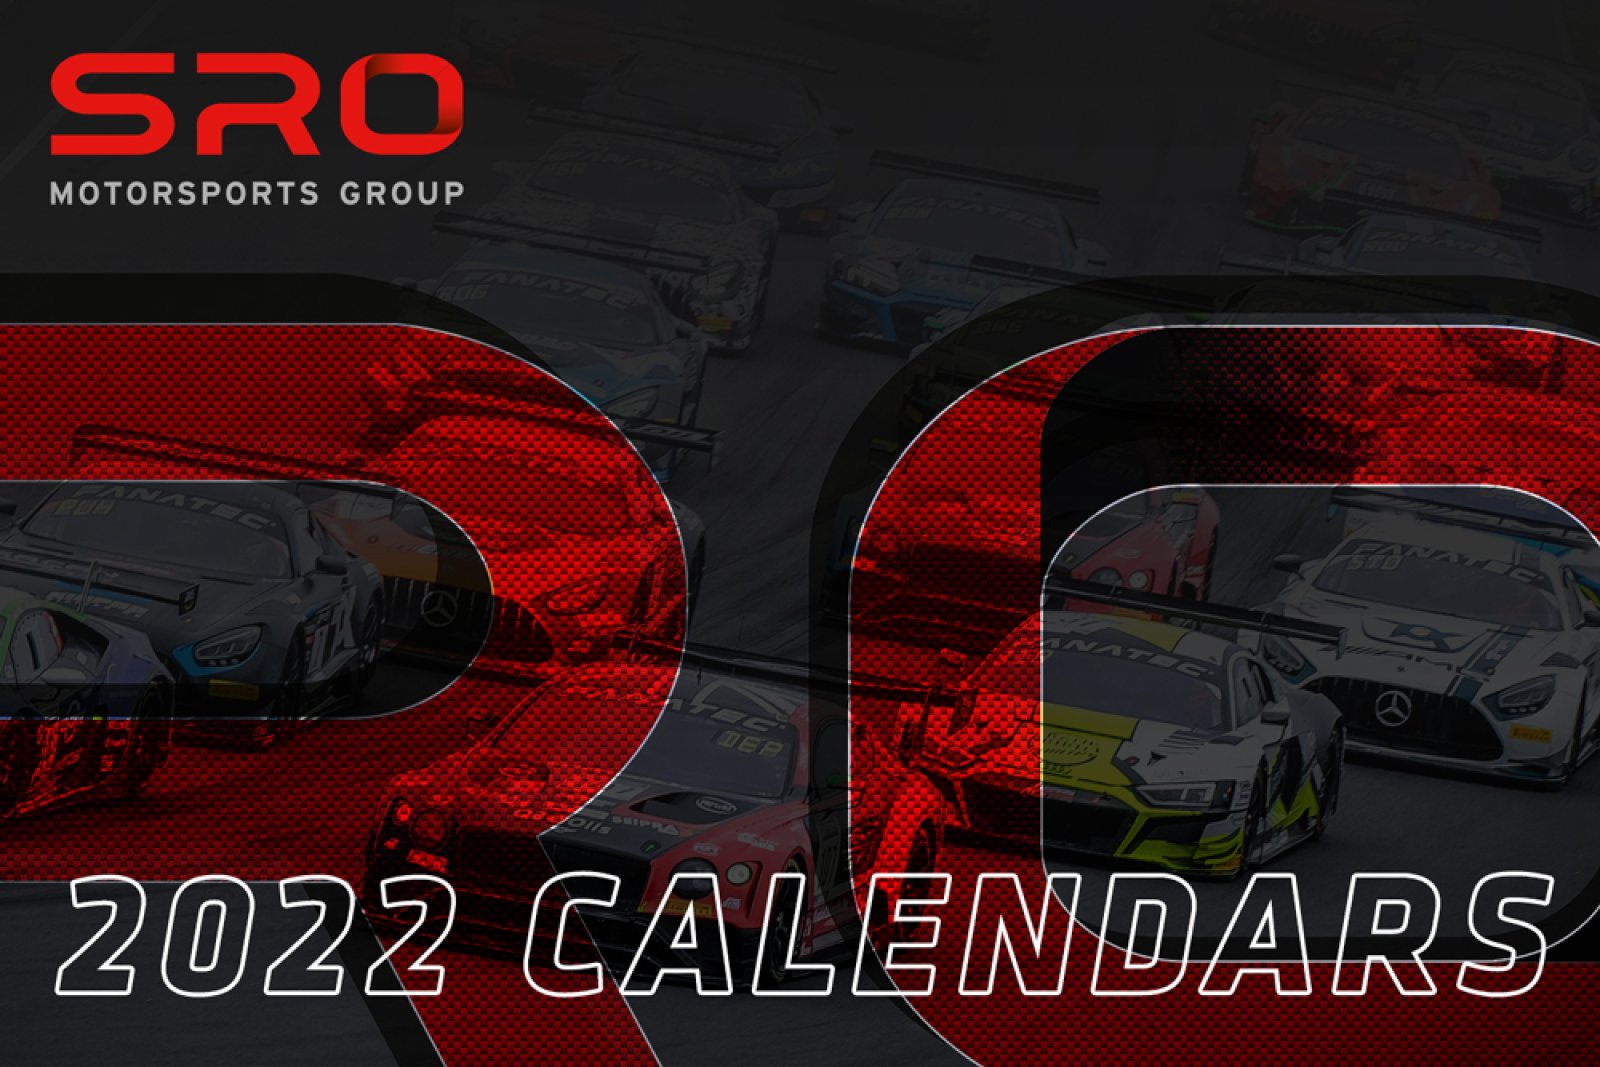 European and American series among first set of 2022 calendars confirmed by SRO Motorsports Group